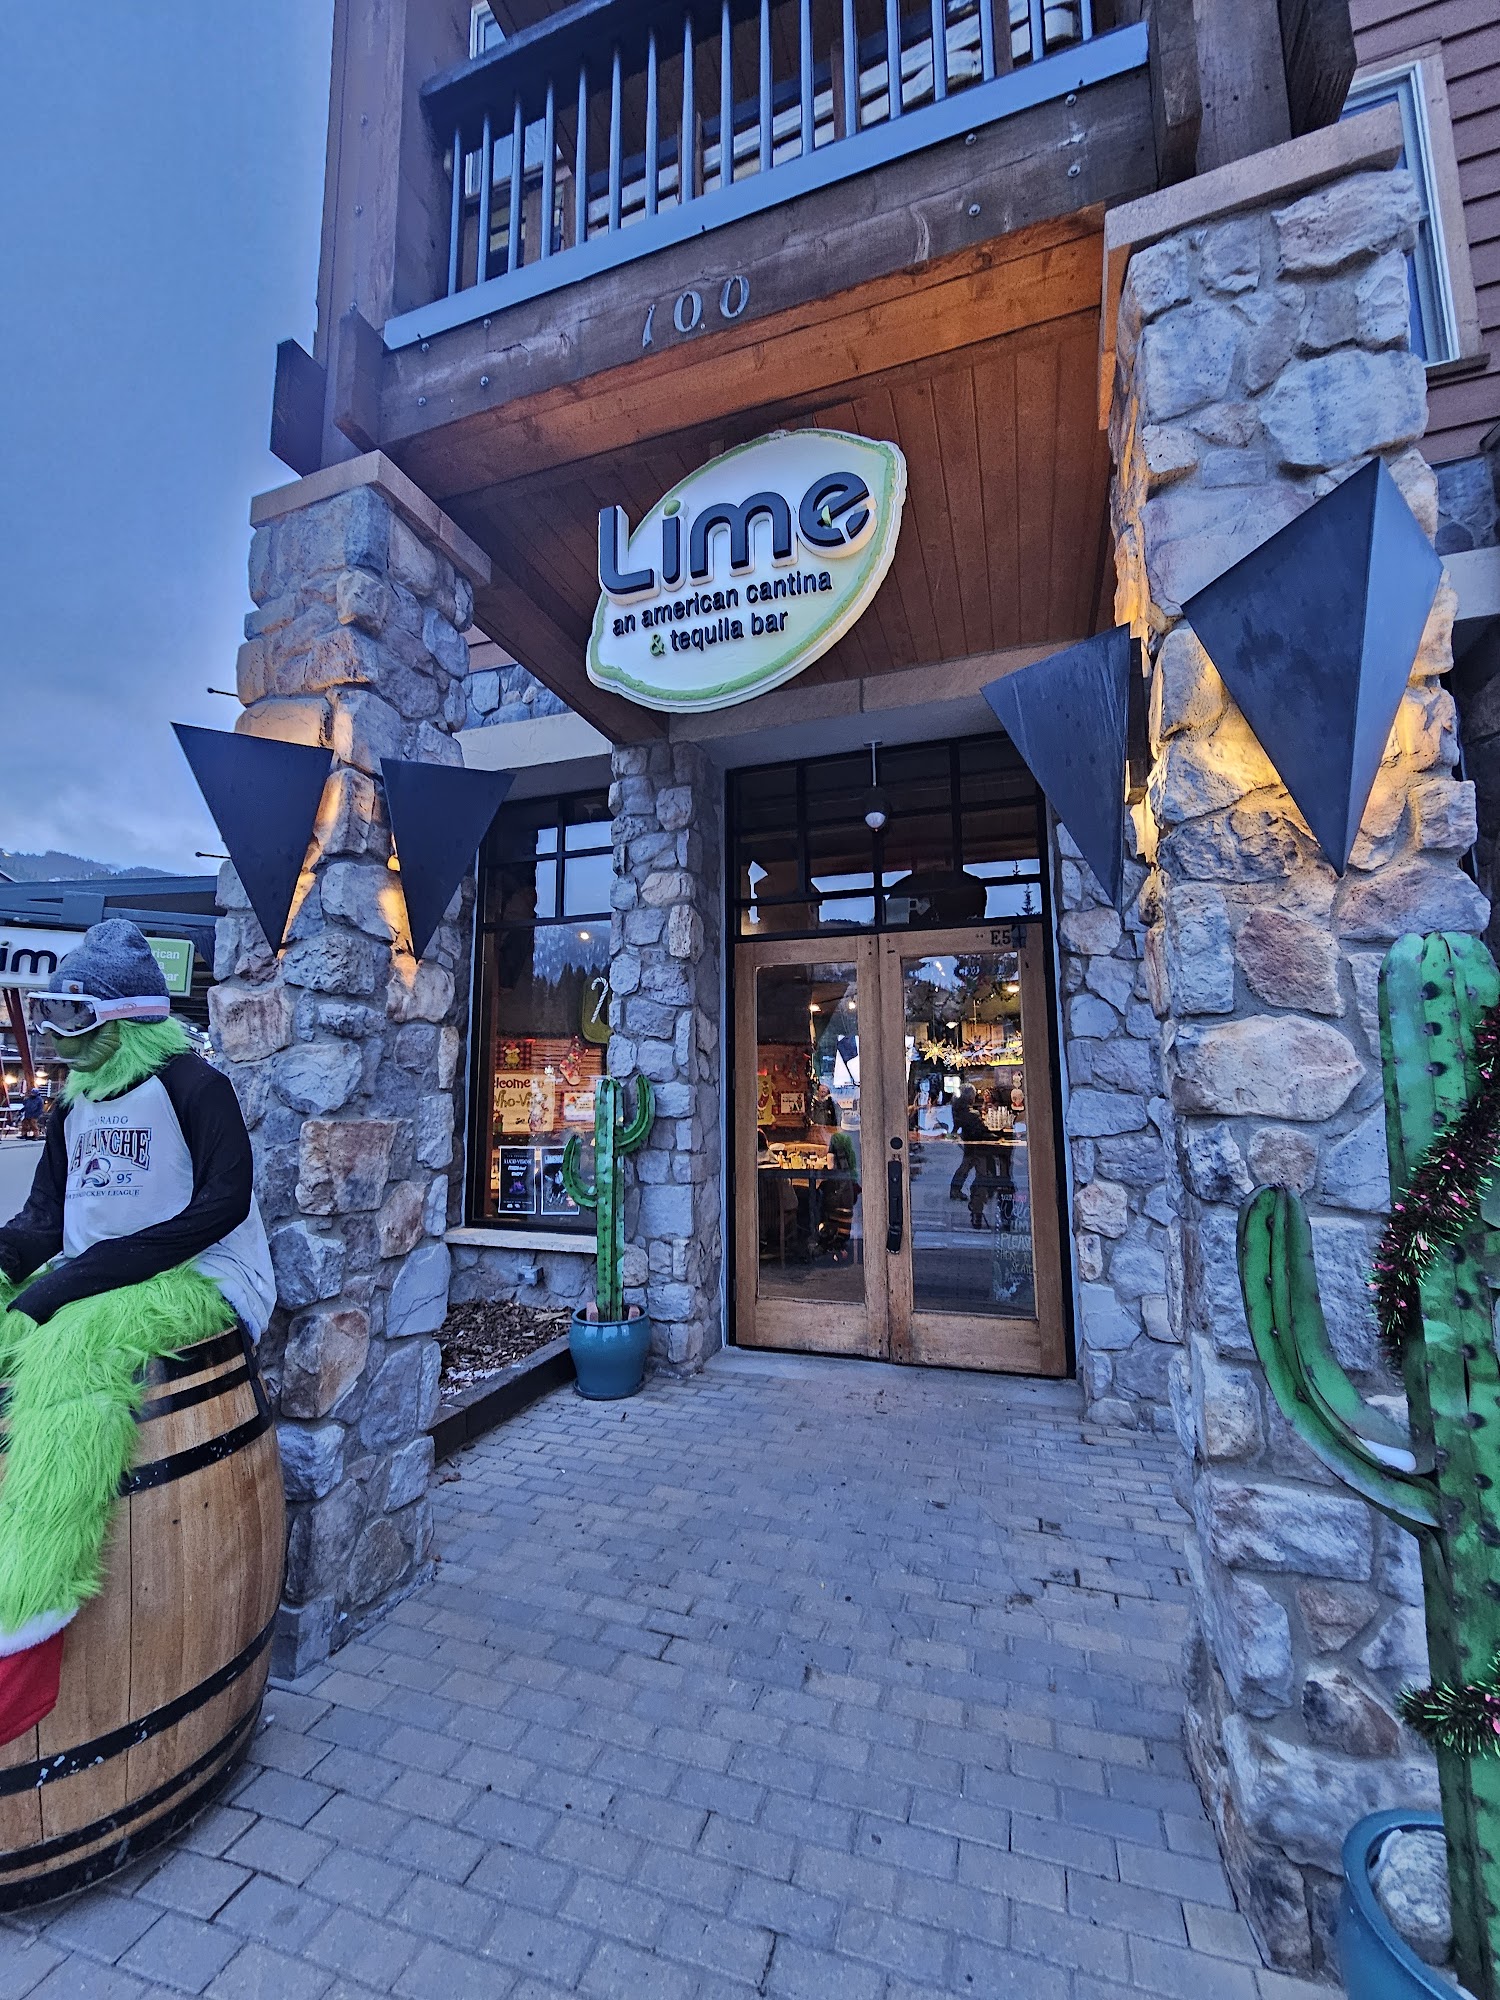 Lime - An American Cantina